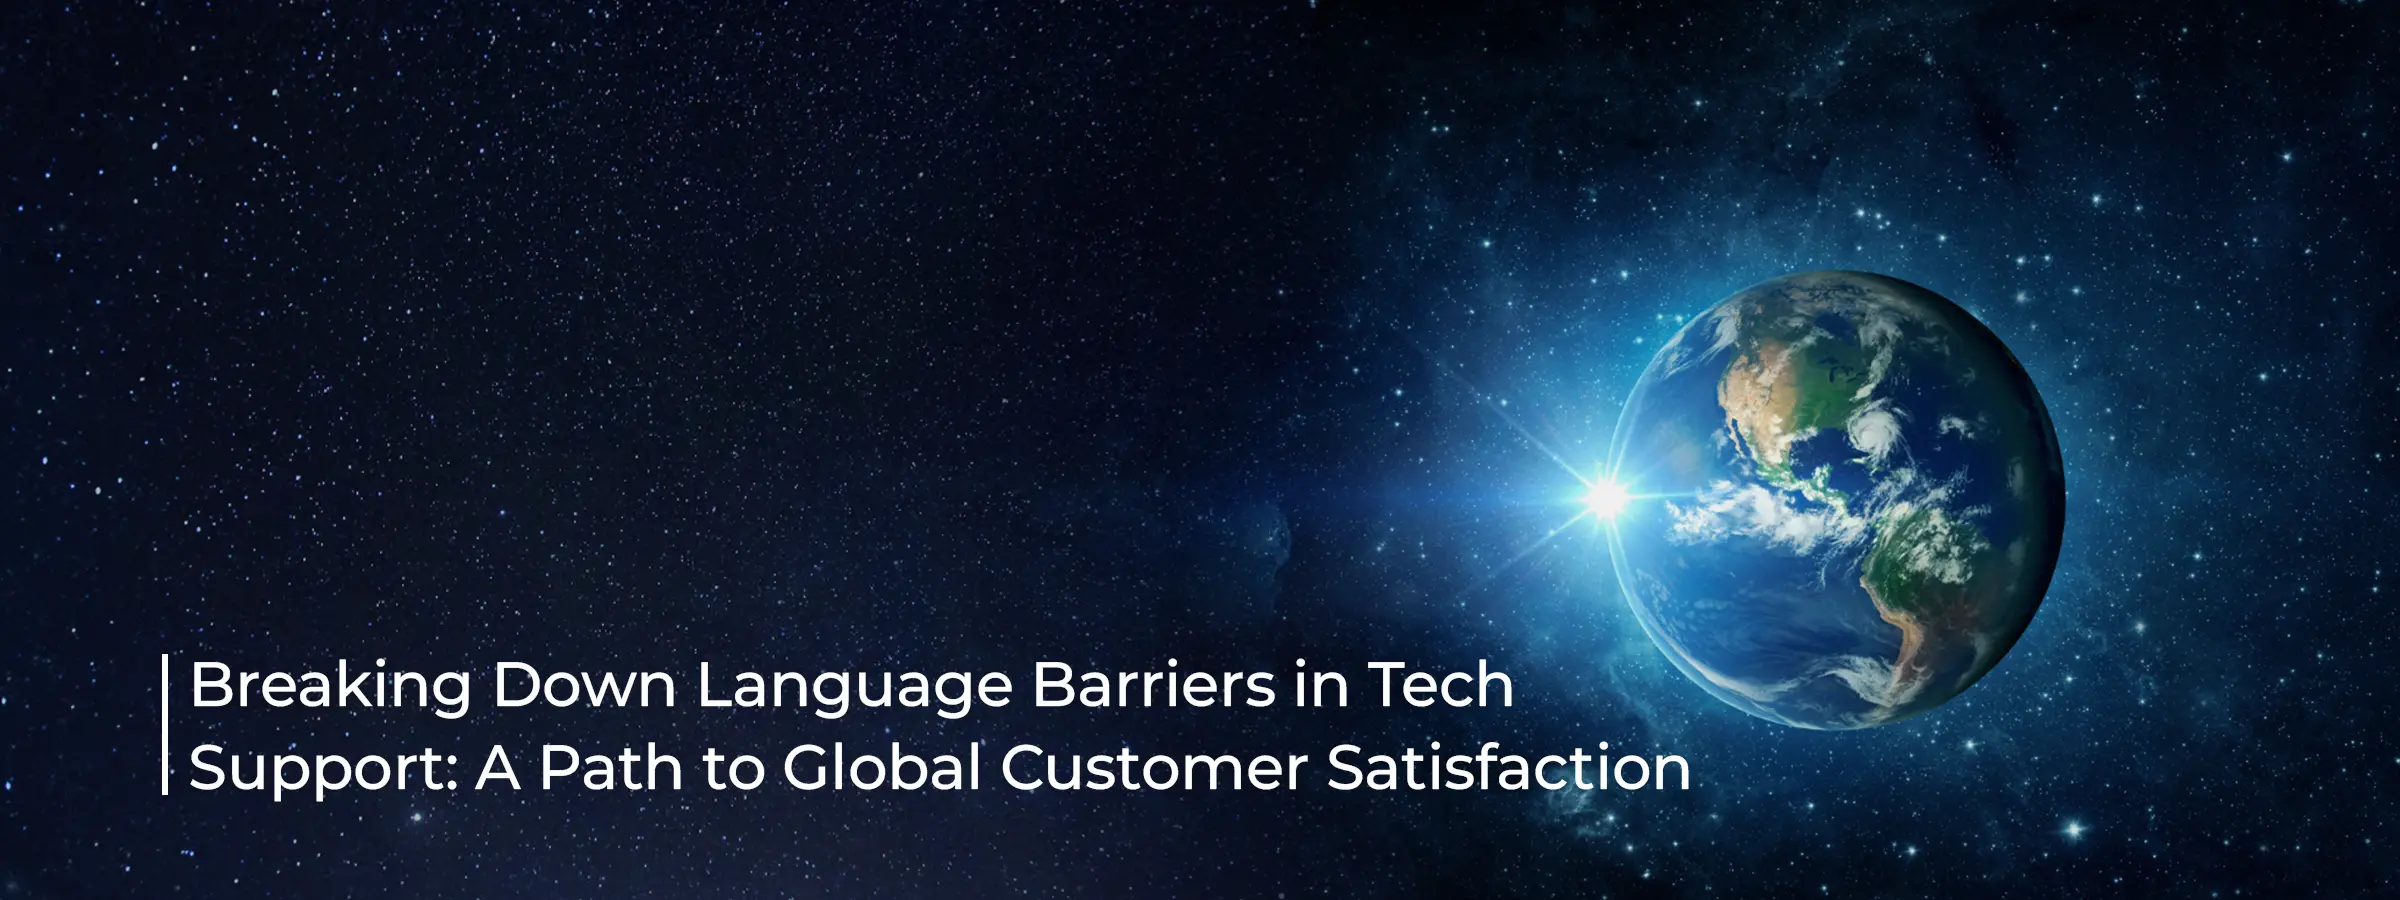 breaking-down-language-barriers-in-tech-support-a-path-to-global-customer-satisfaction